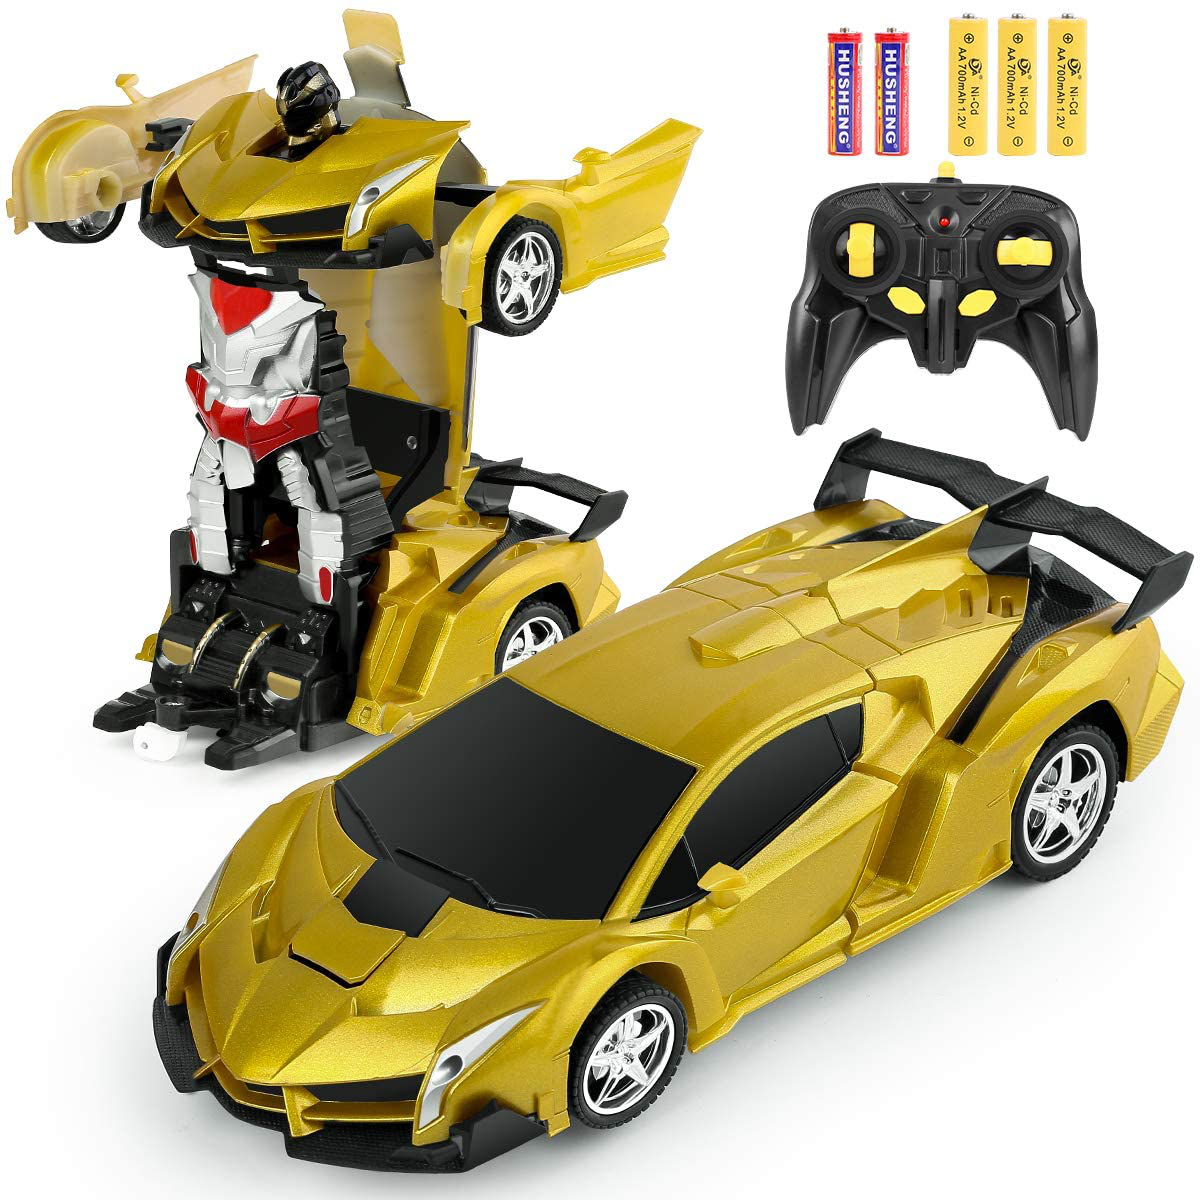 Remote Control Car Transforming Robot, BIFYTON Transform Car Robot with One Button Transformation and 360 Degree Rotating Drifting, RC Cars Robot Toys for Kids Boys and Girls